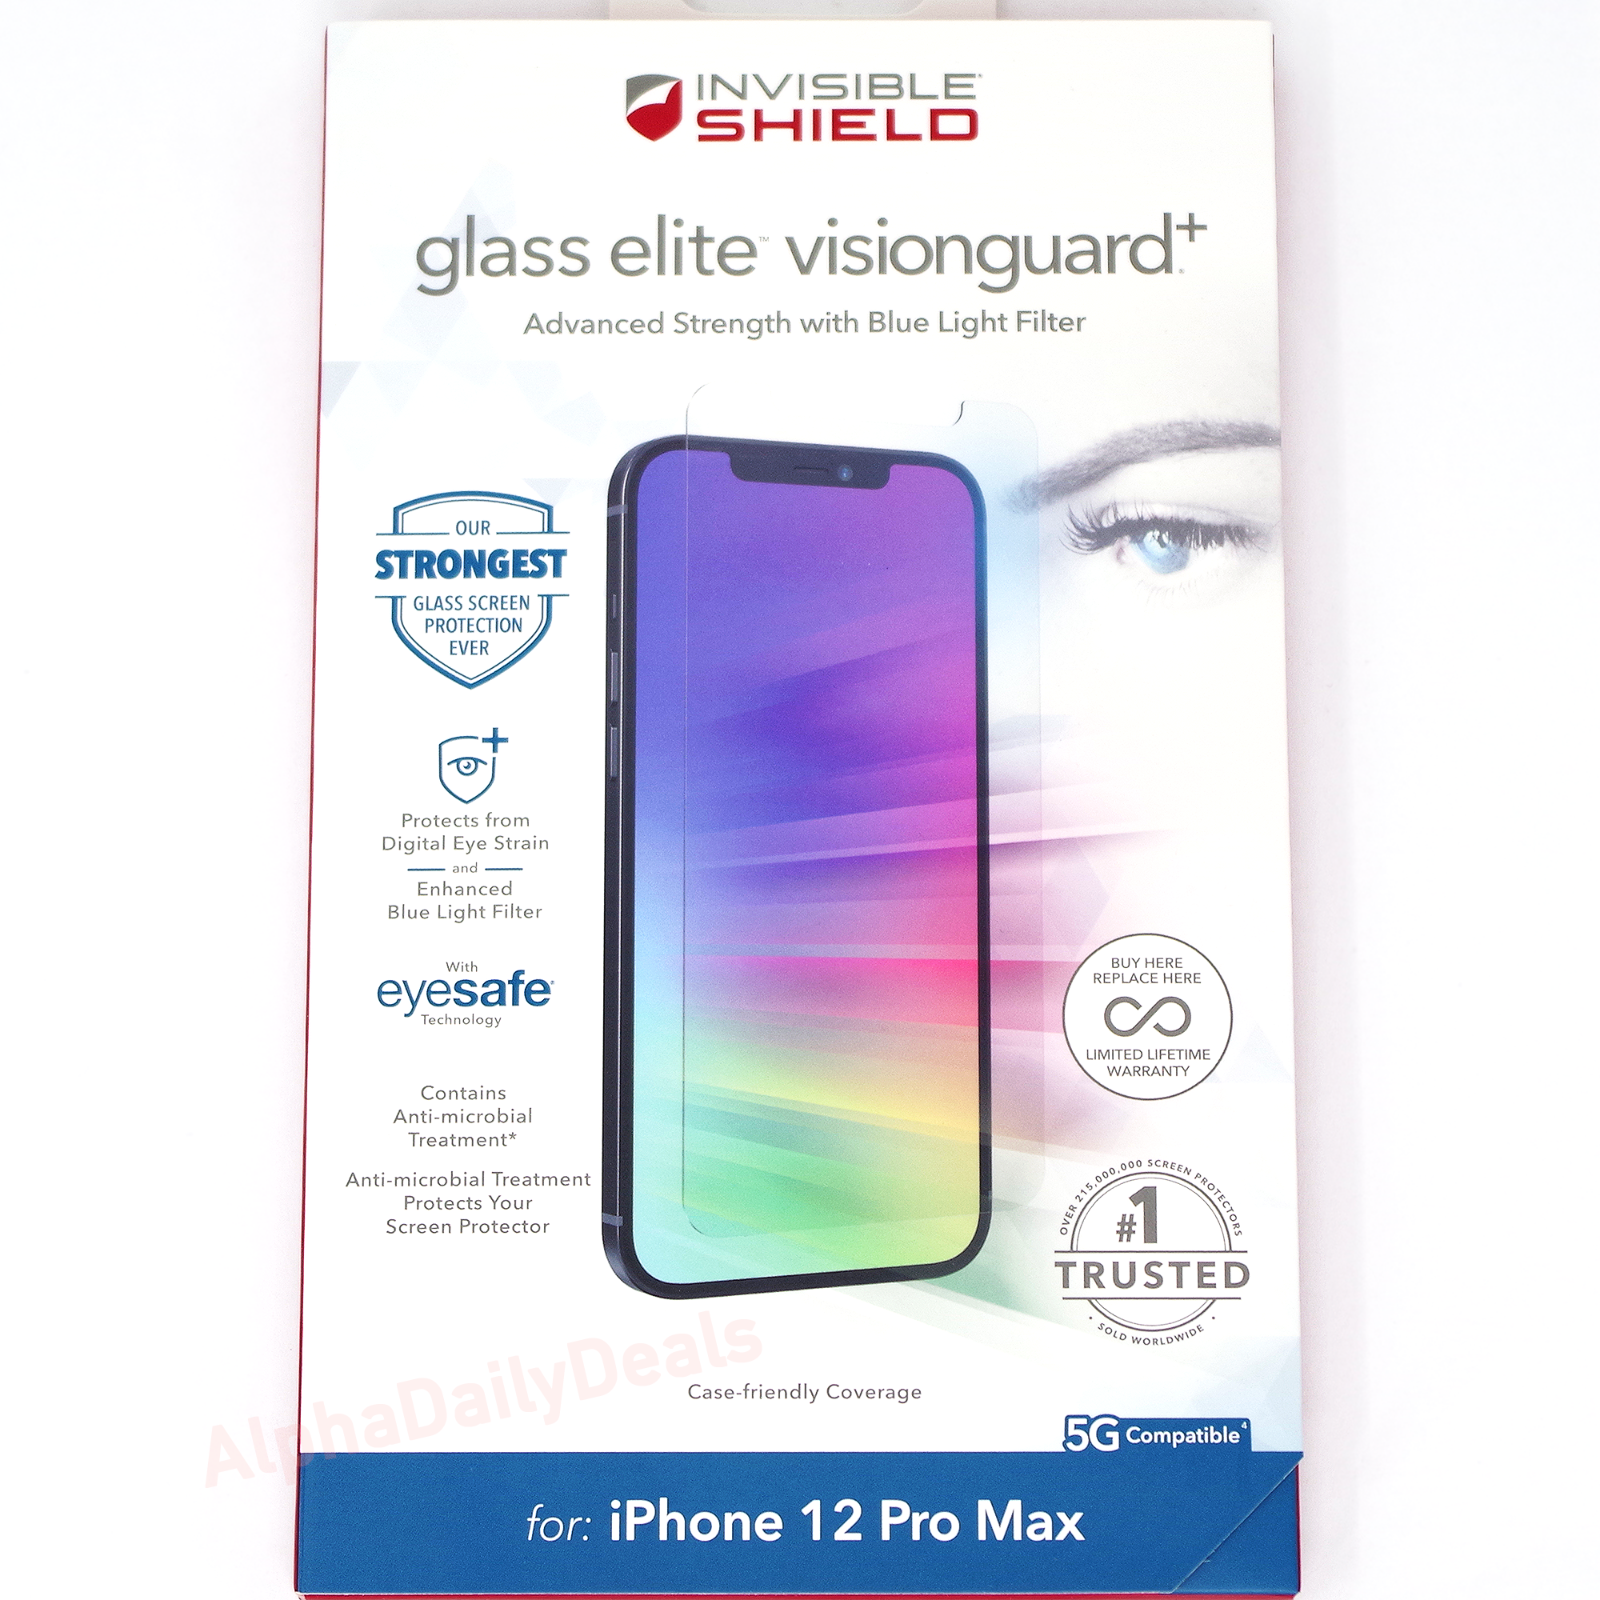 ZAGG Glass Elite VisionGuard+ Tempered Screen Protector for iPhone 12 Pro Max